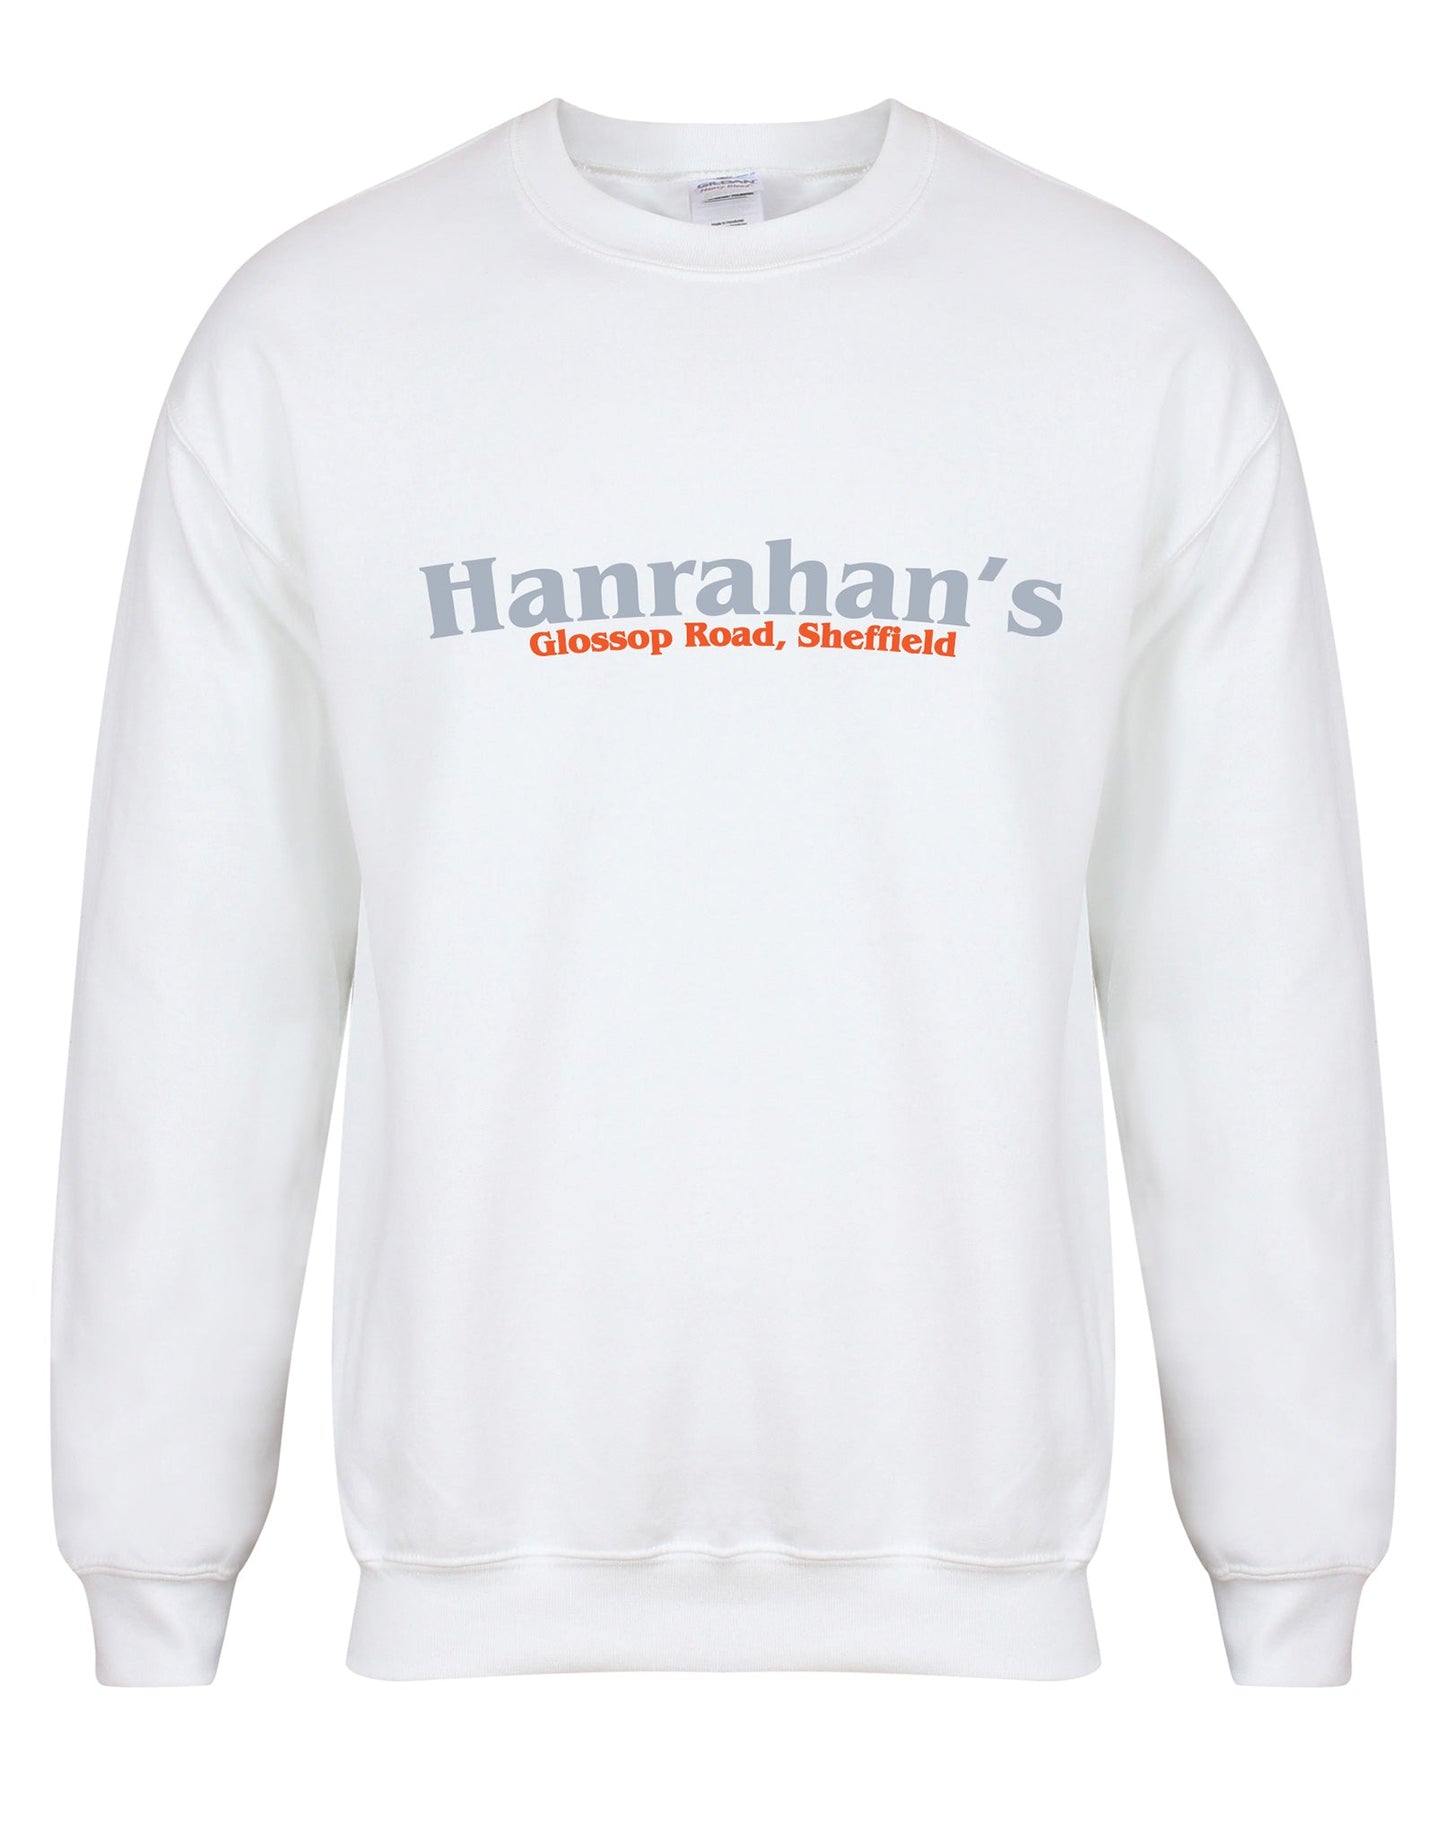 Hanrahan's unisex fit sweatshirt - various colours - Dirty Stop Outs